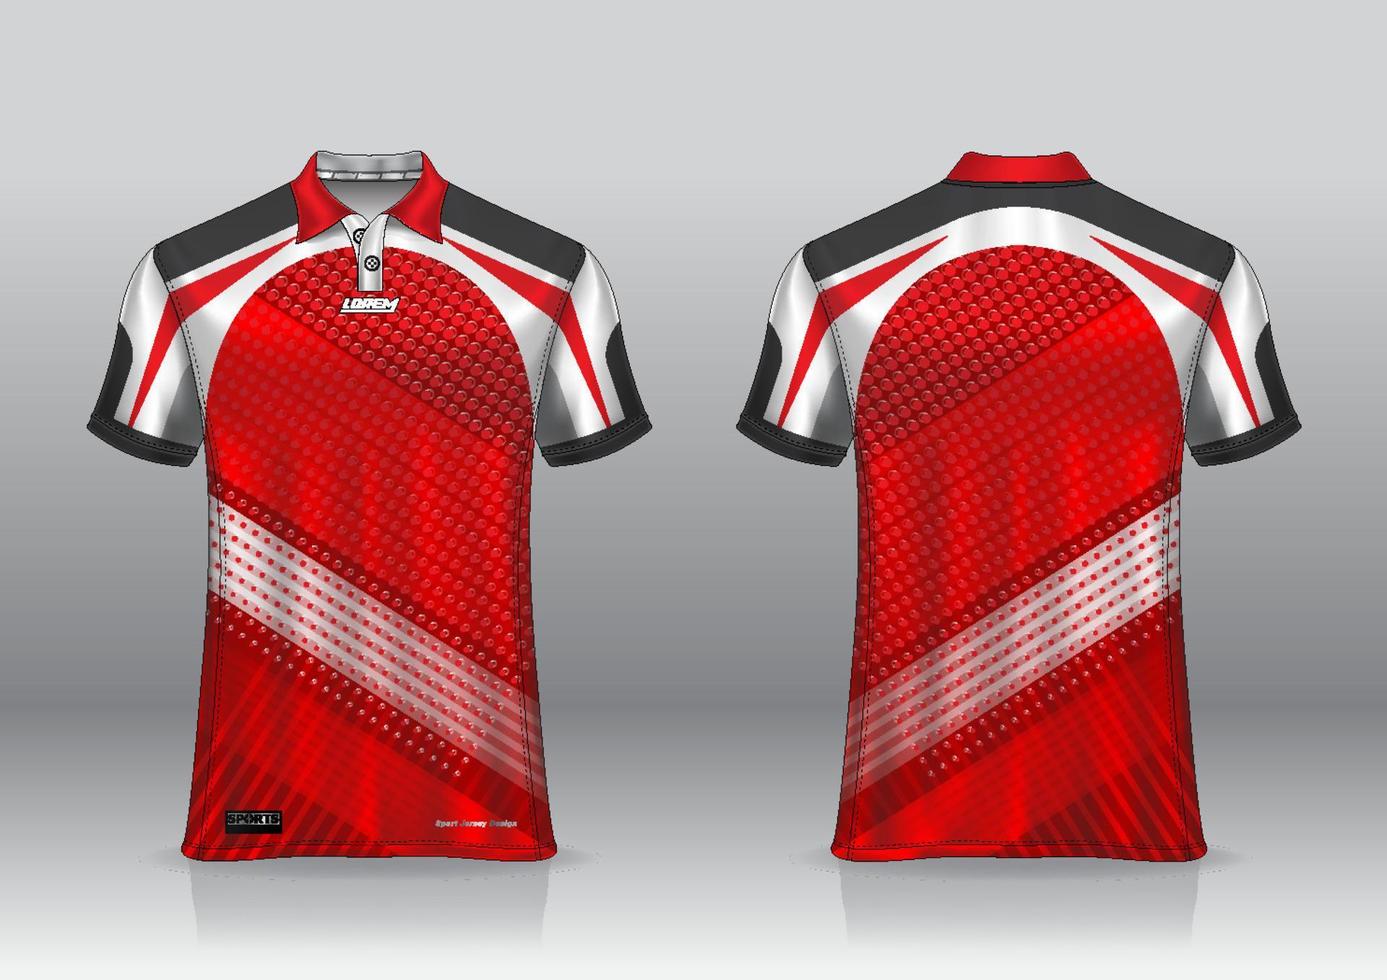 polo shirt jersey design for sports outdoor front and back view vector